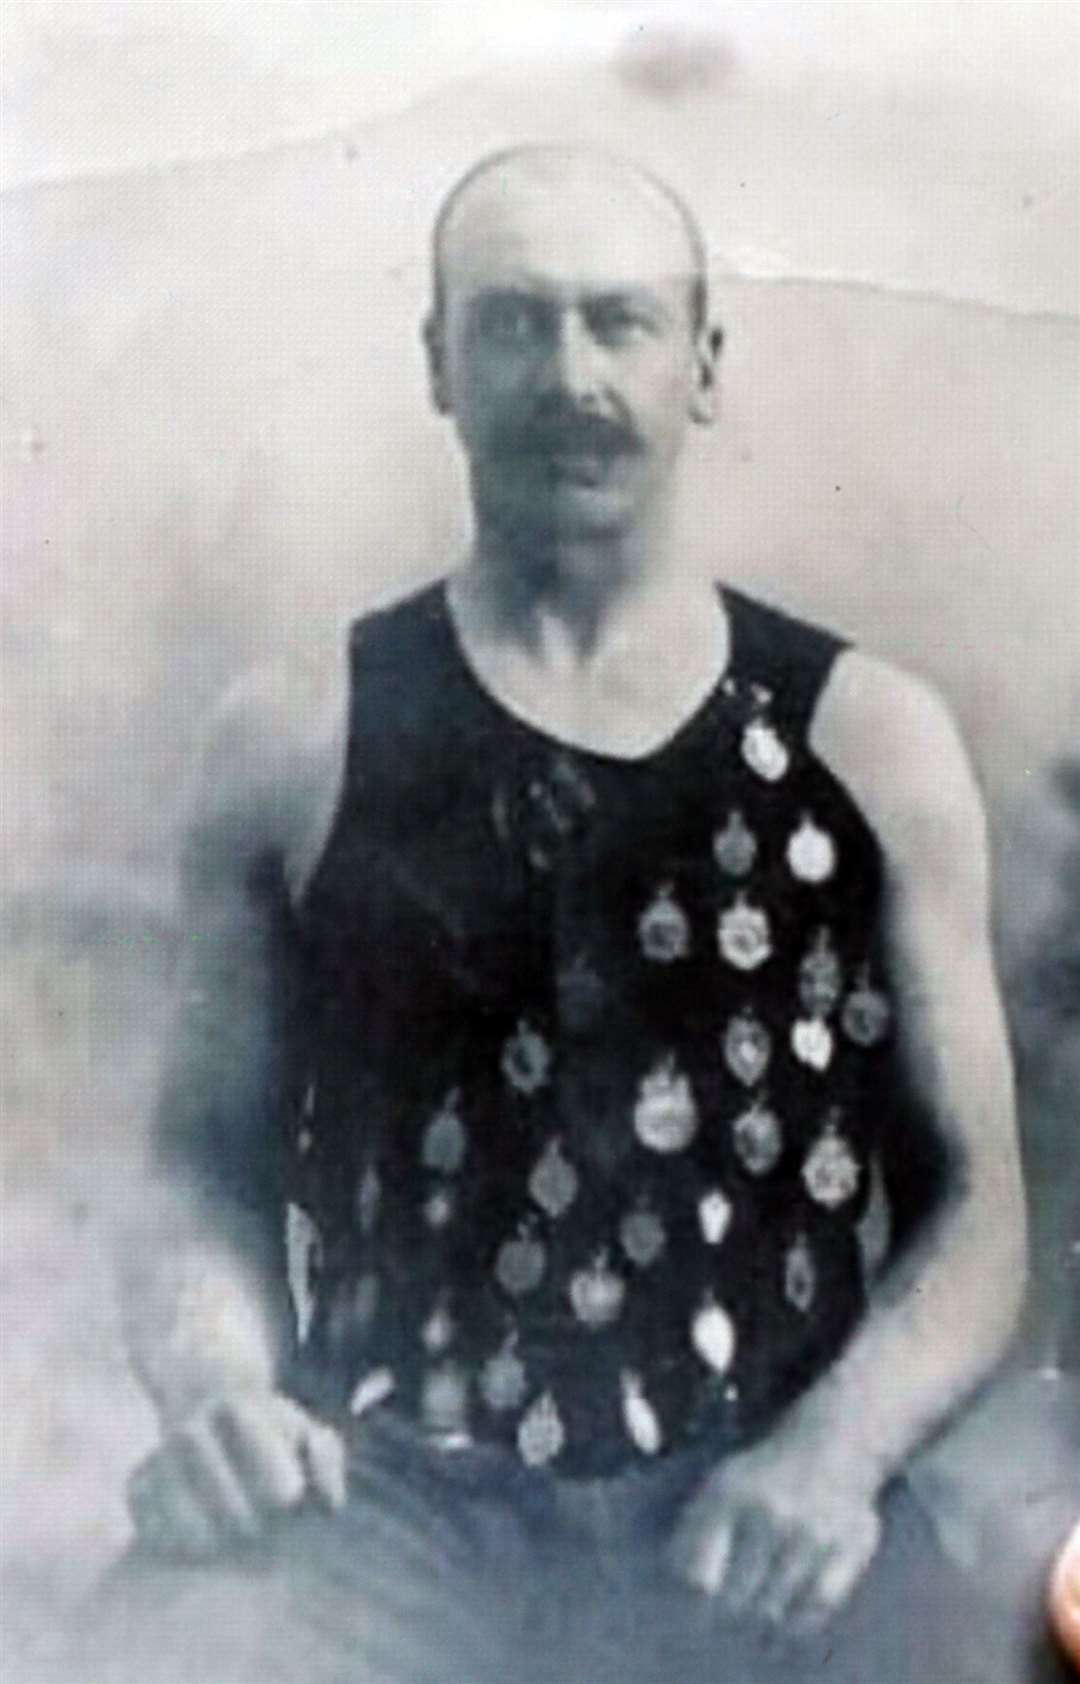 Charles Taylor who's athletic prowess led to him being given the Cabrach Rose Bowl in 1929.